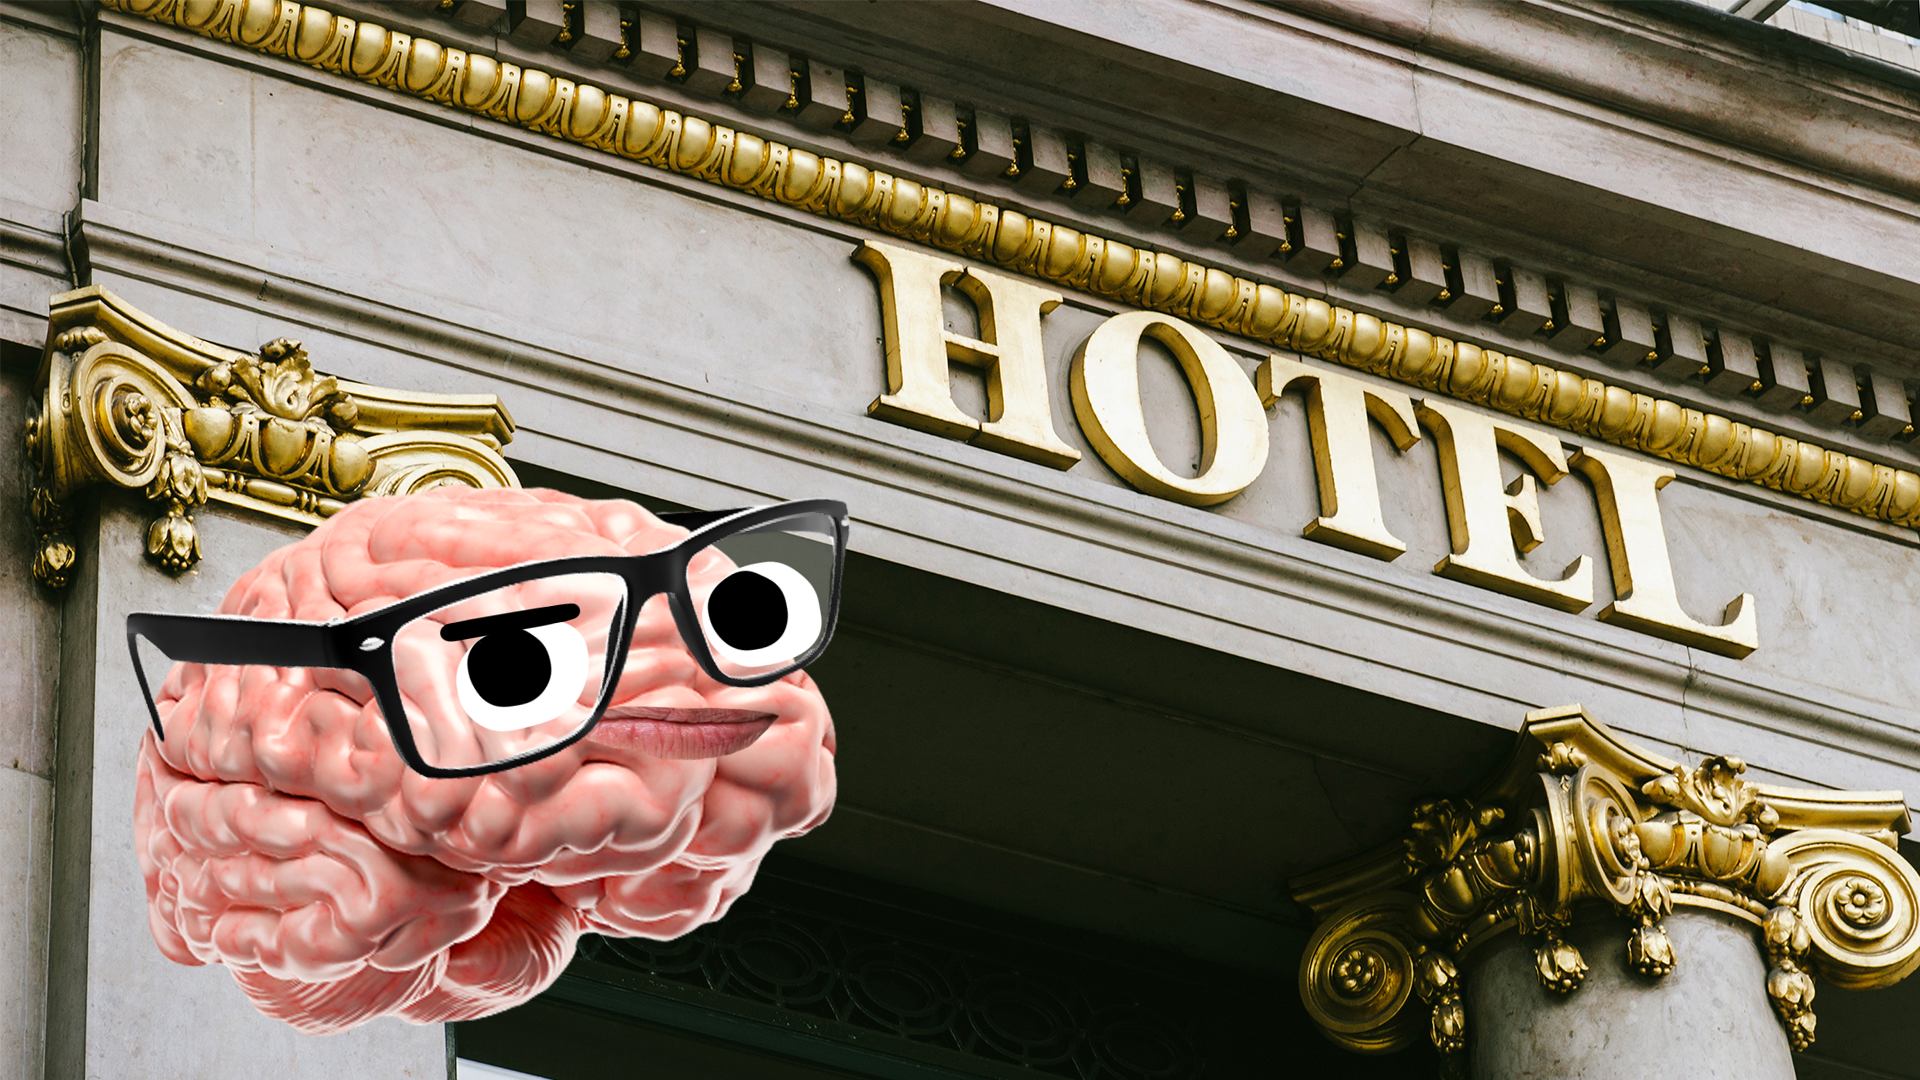 A brain wearing glasses looks quizzically at a hotel sign